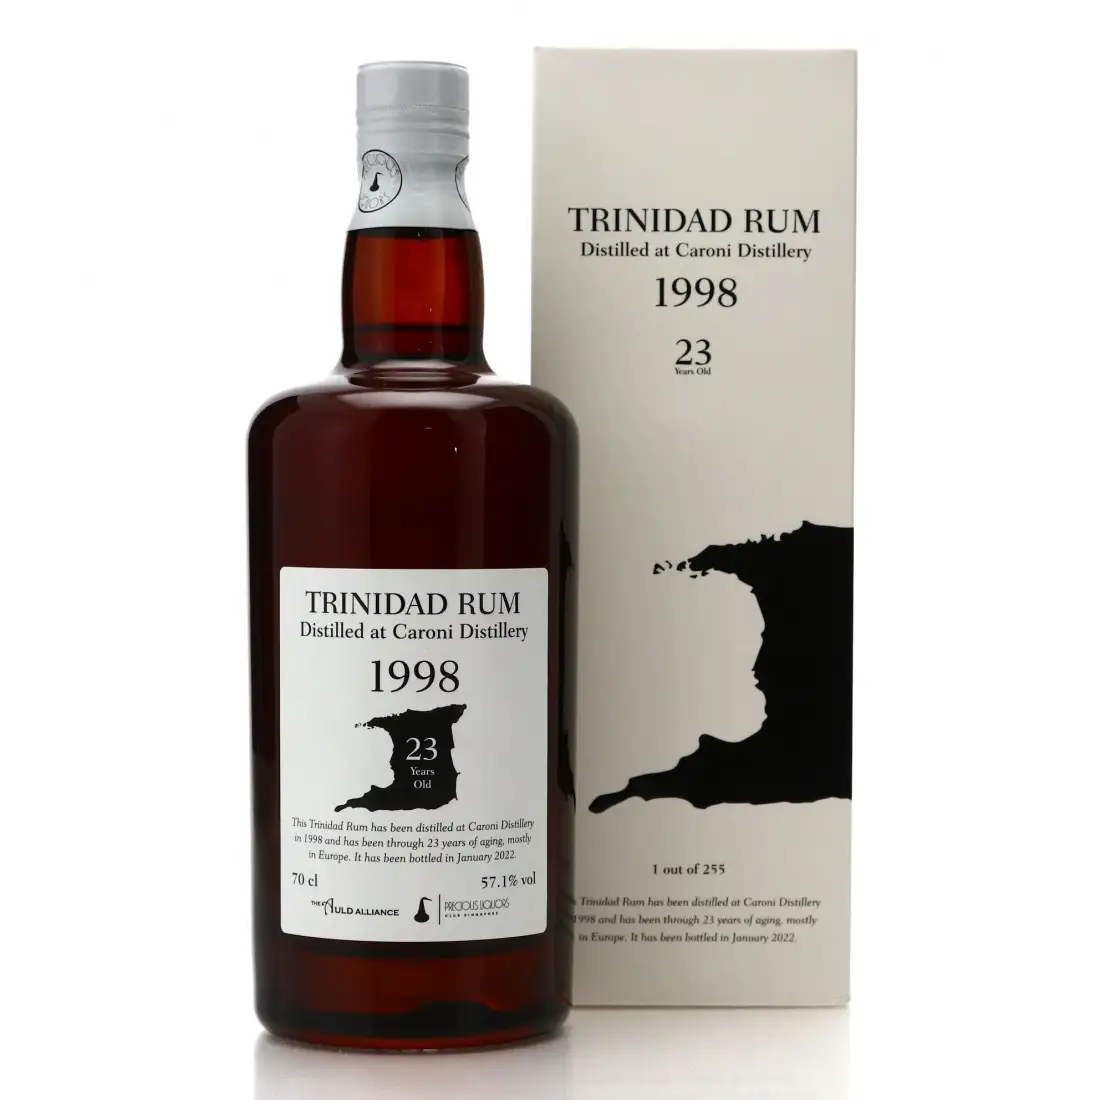 Image of the front of the bottle of the rum Trinidad Rum